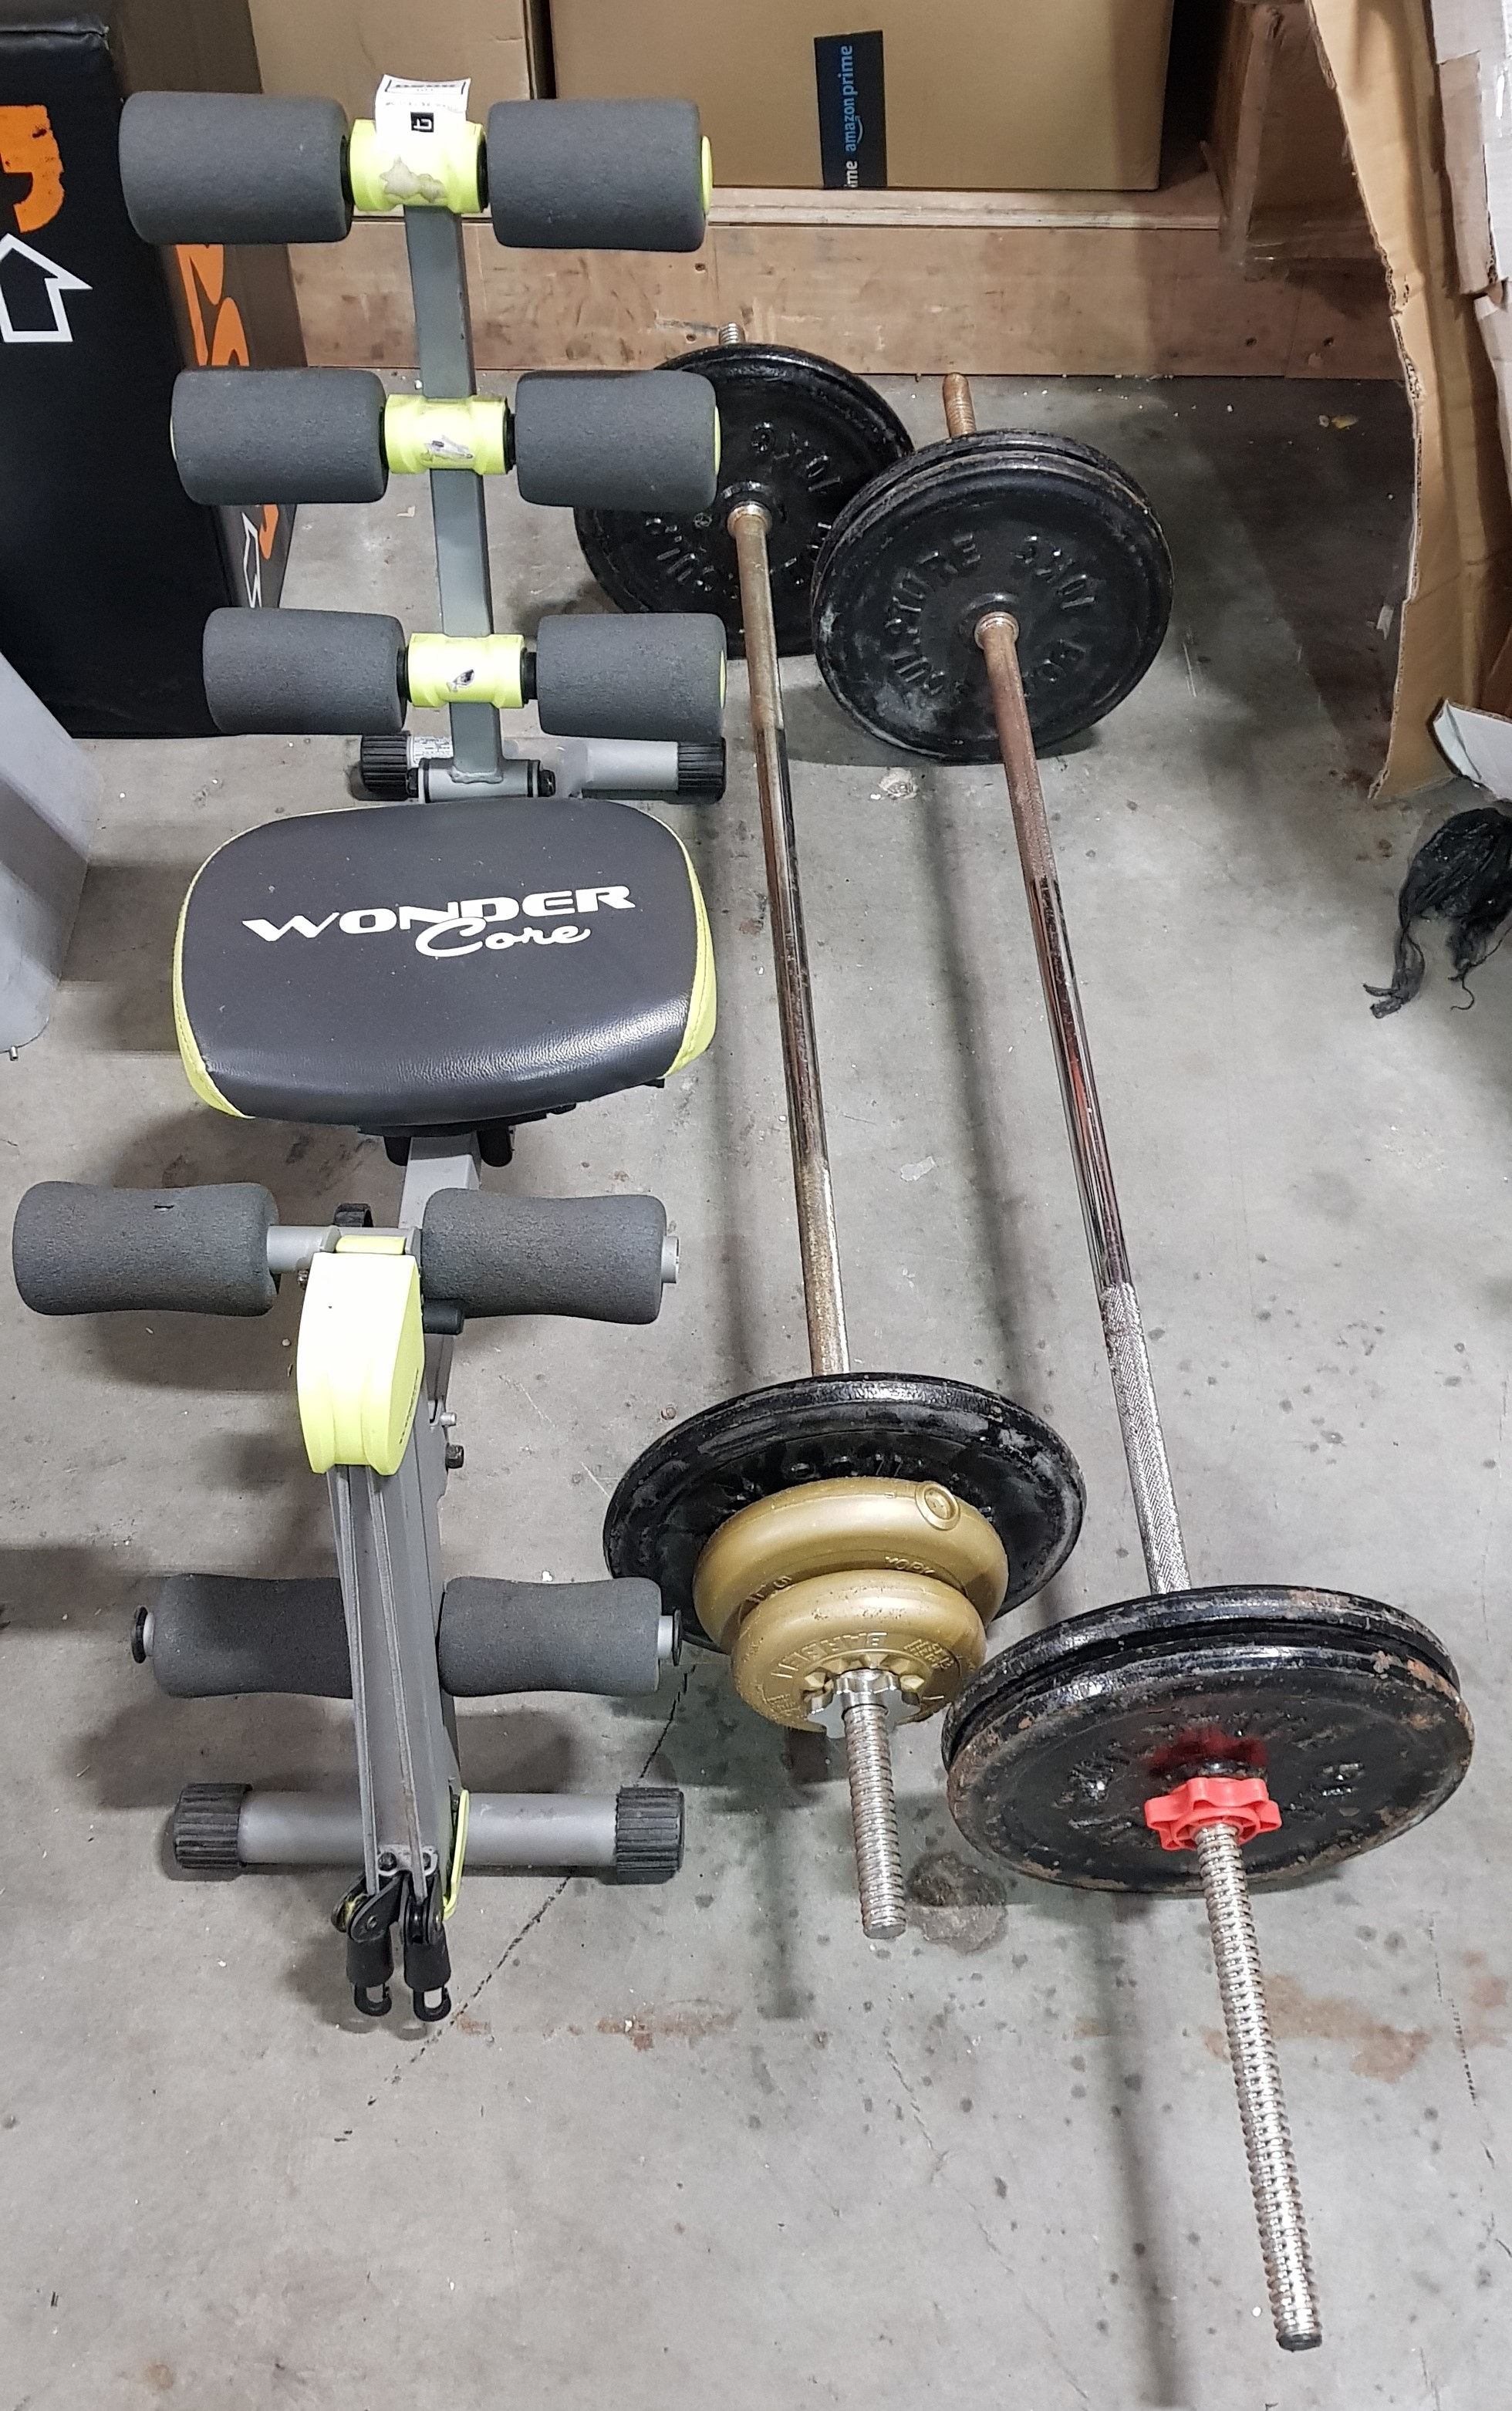 3 PIECE MIXED LOT CONTAINING 2 X METAL BARBELLS WITH PLATES INCLUDING 6 X 10 KG PLATES / 2 X 2.3